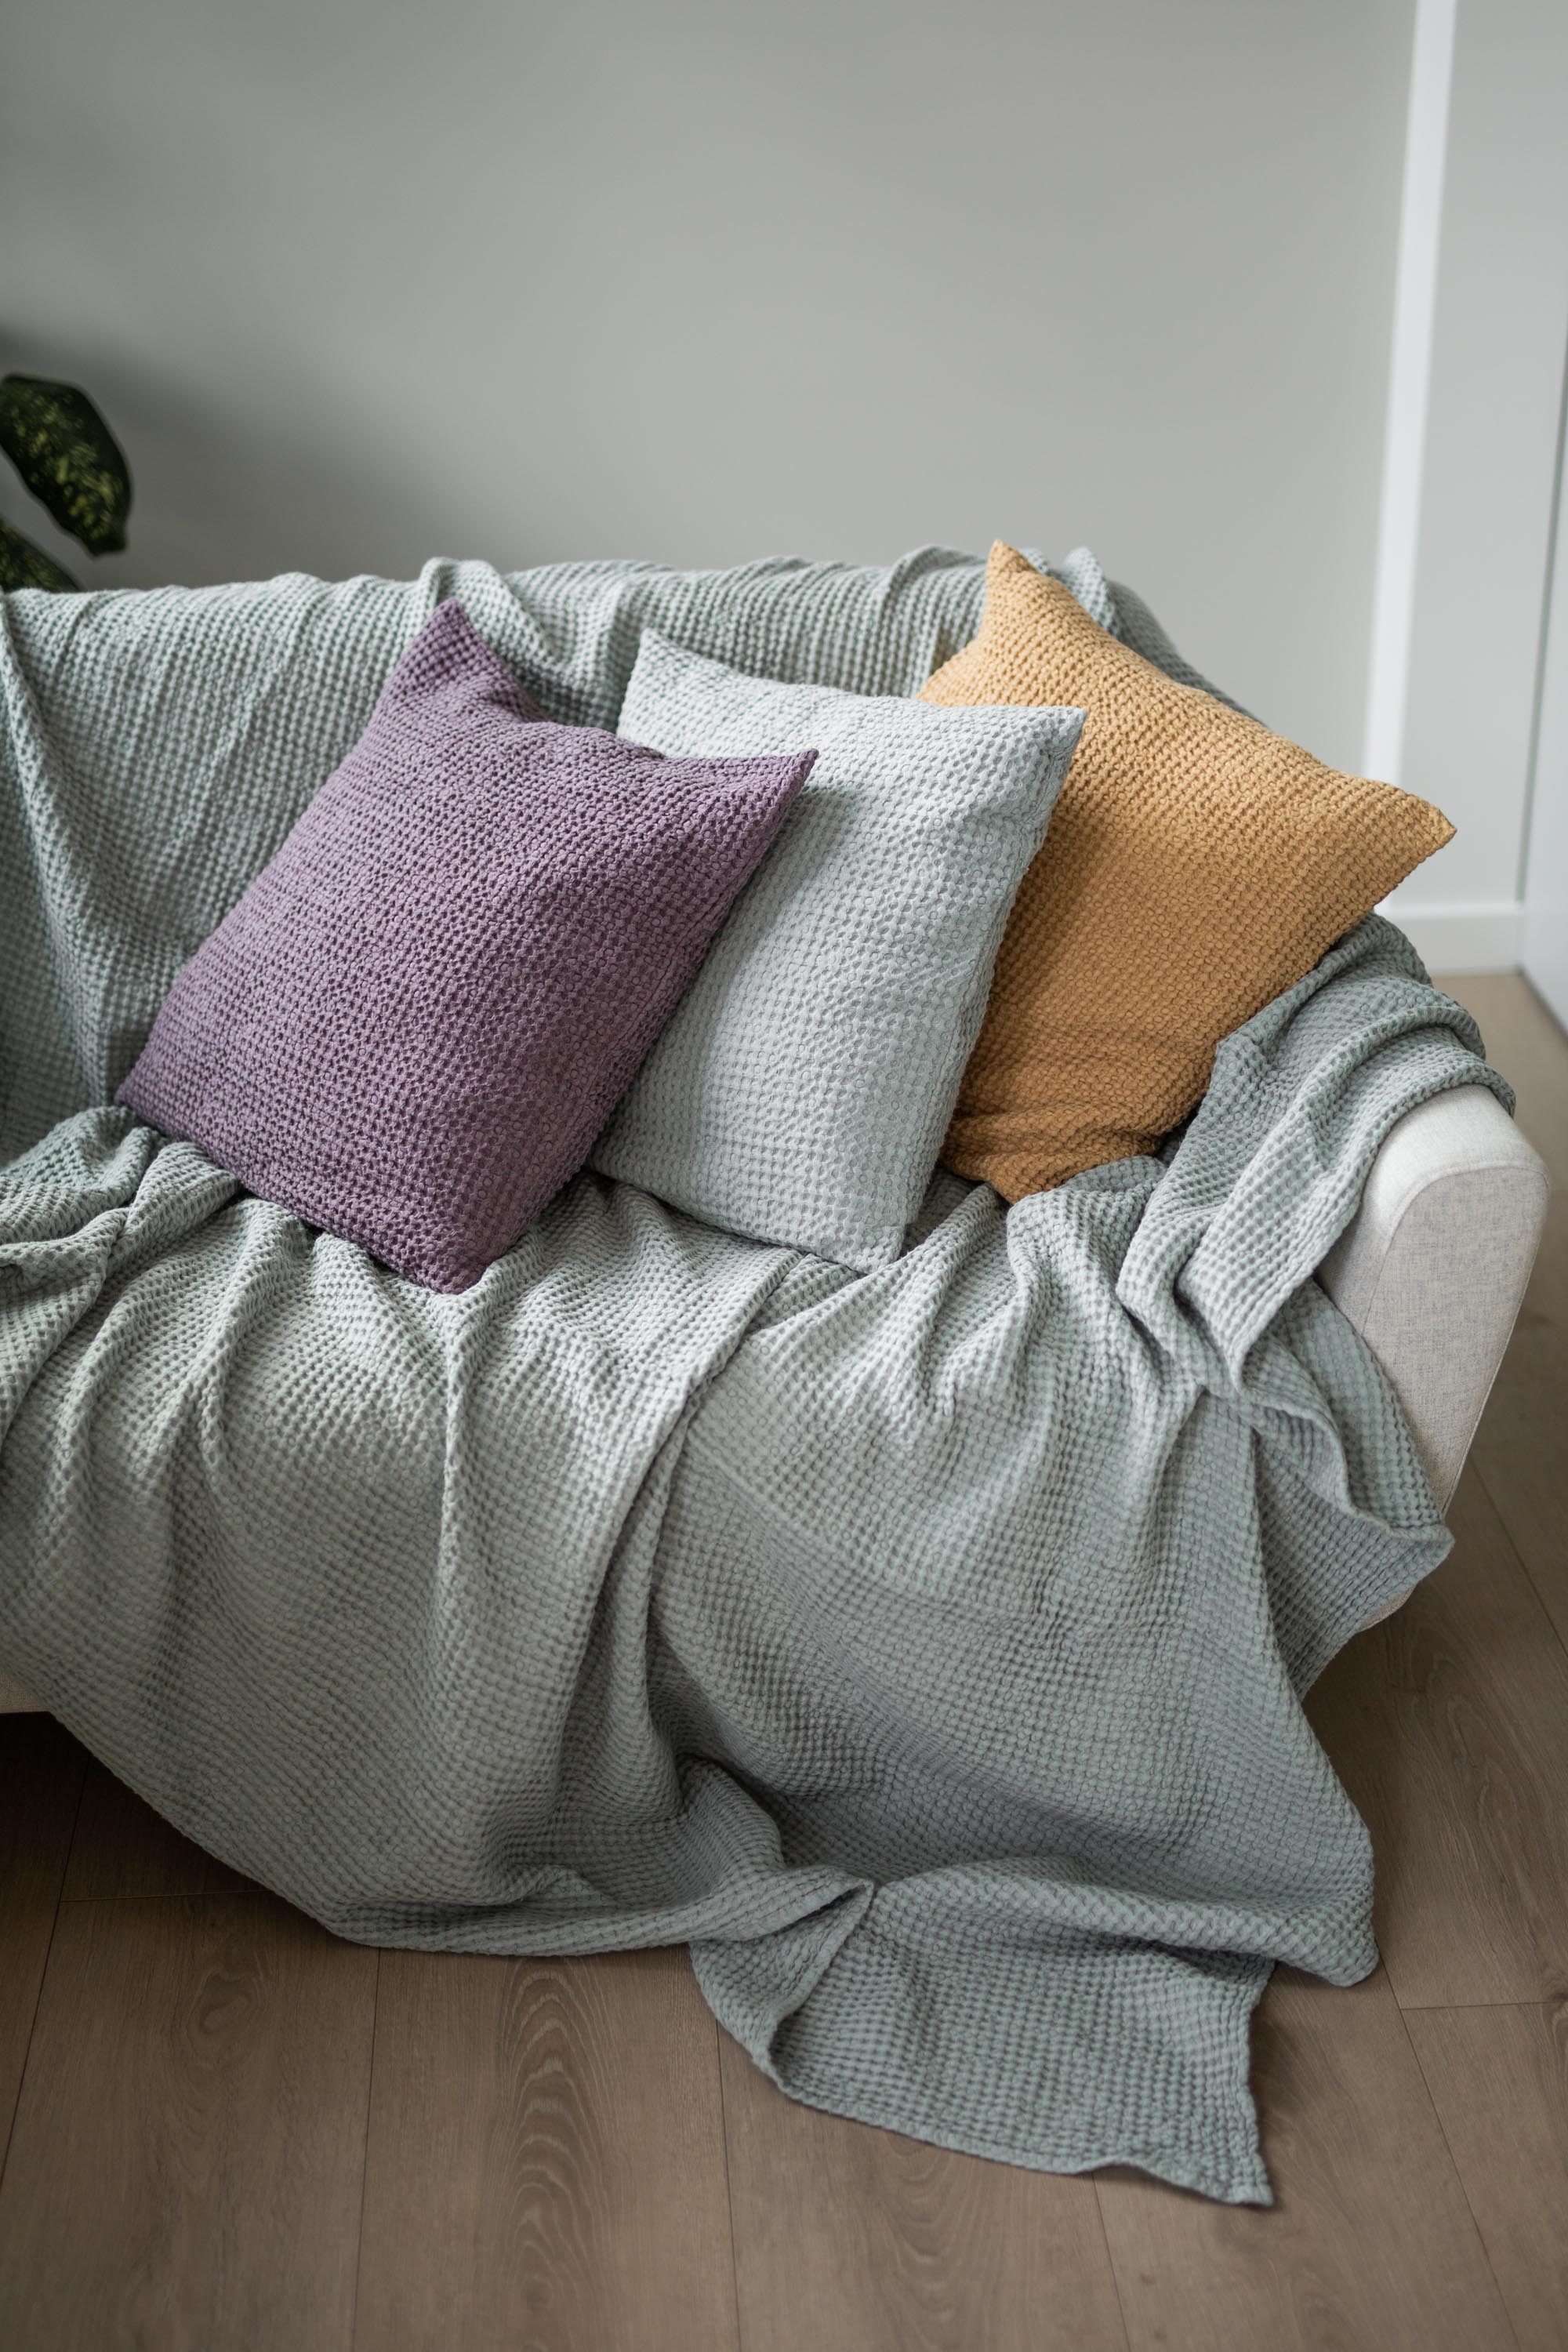 Sage Green Linen Waffle Blanket On Couch With Pillows By AmourLinen